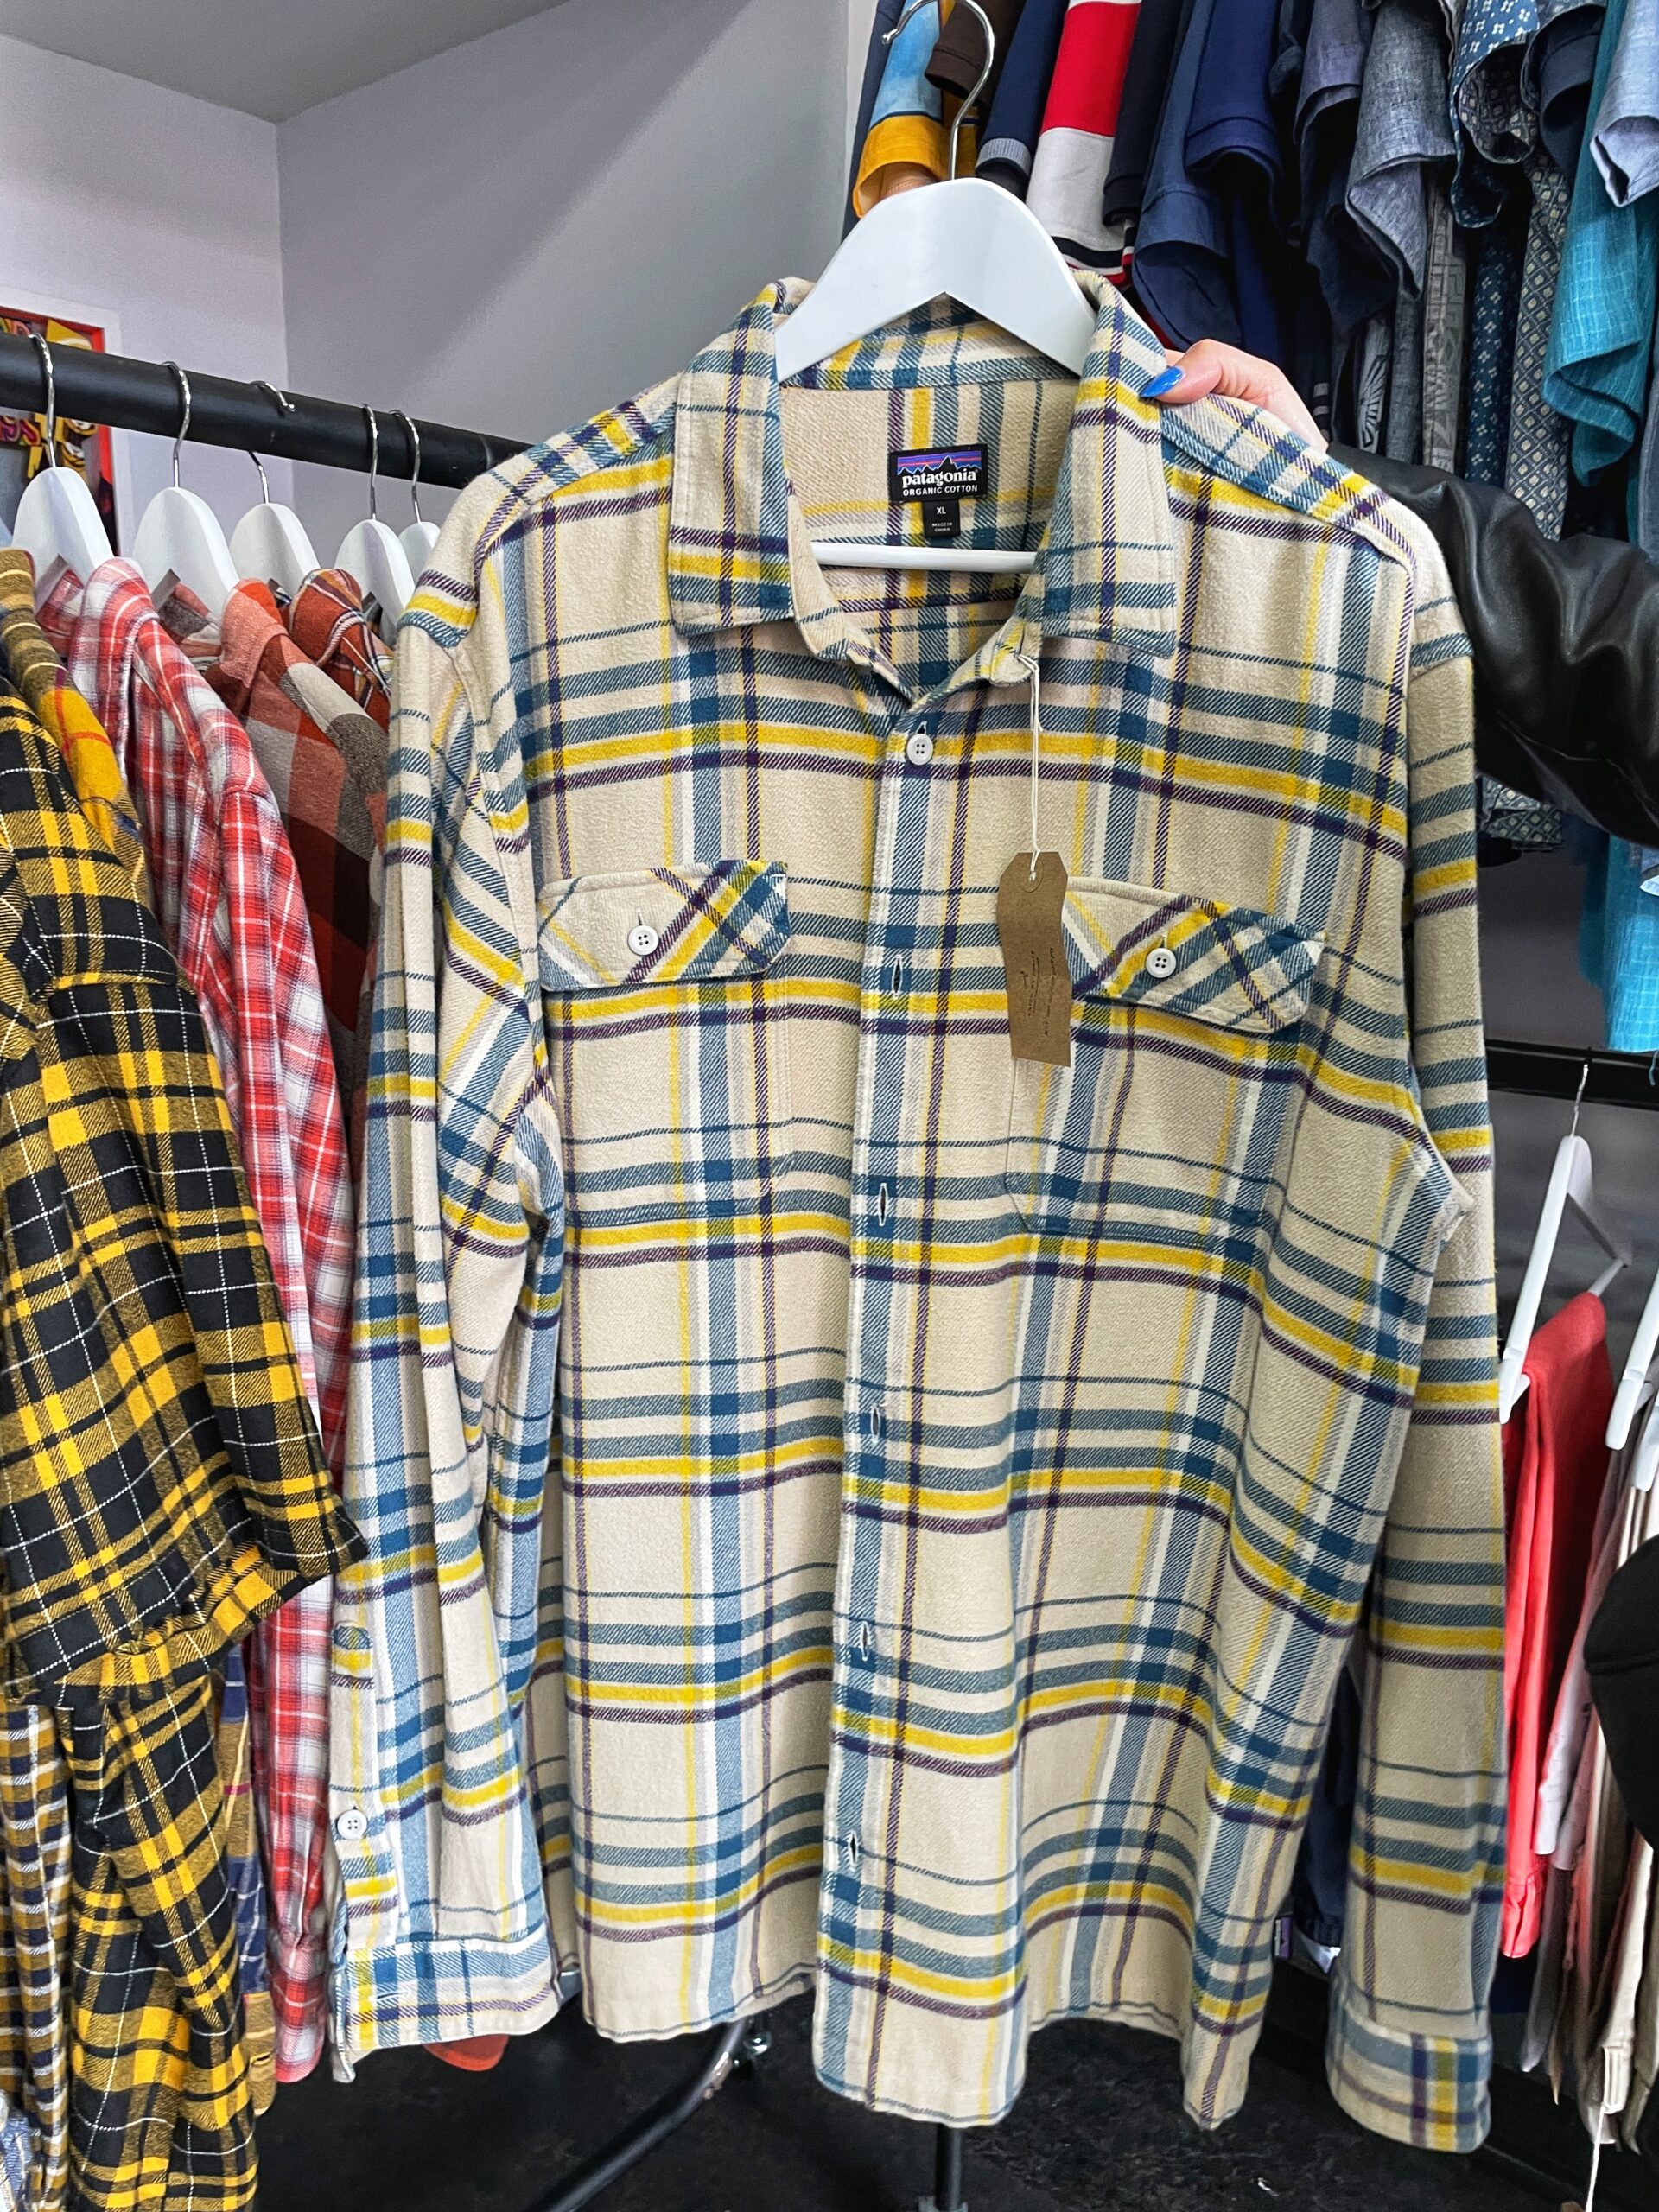 A Patagonia flannel shirt for only £16 at Catch My Thrift vintage shop in Manchester